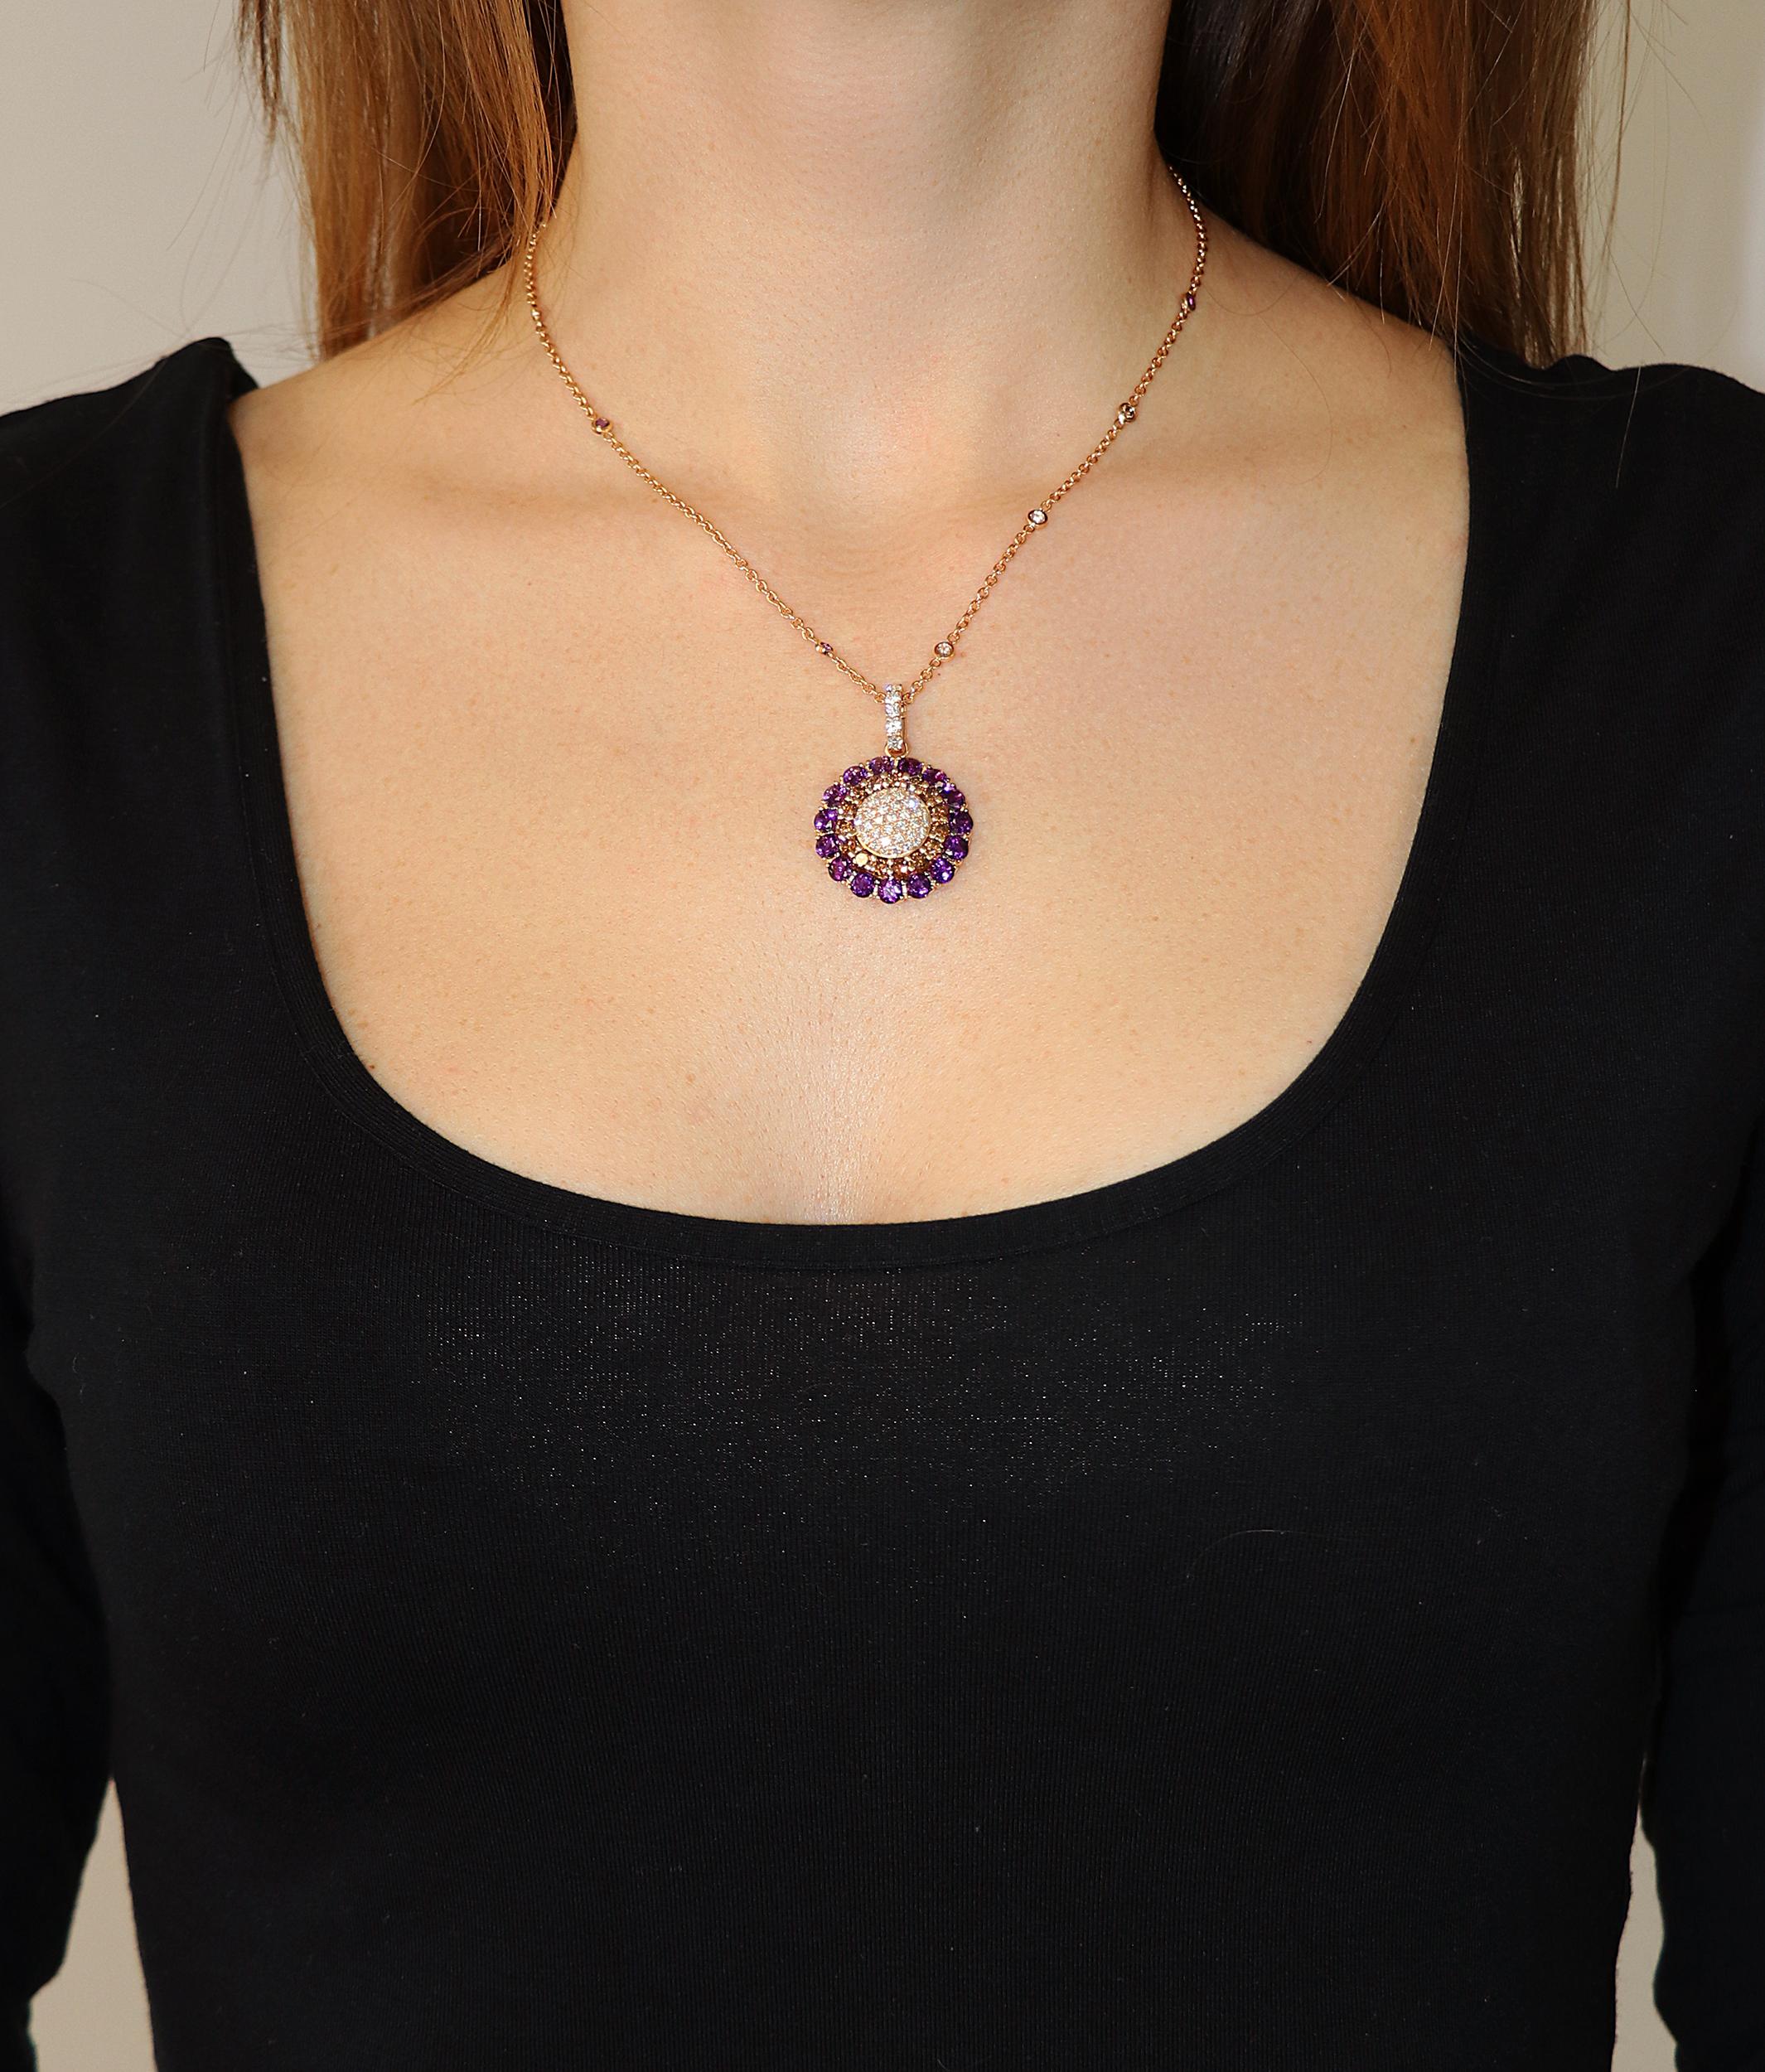 0.93 GSI Diamonds 1.36 Brown Diamonds 3.08 Amethyst Pink Gold Pendant Necklace In New Condition For Sale In Valenza, IT